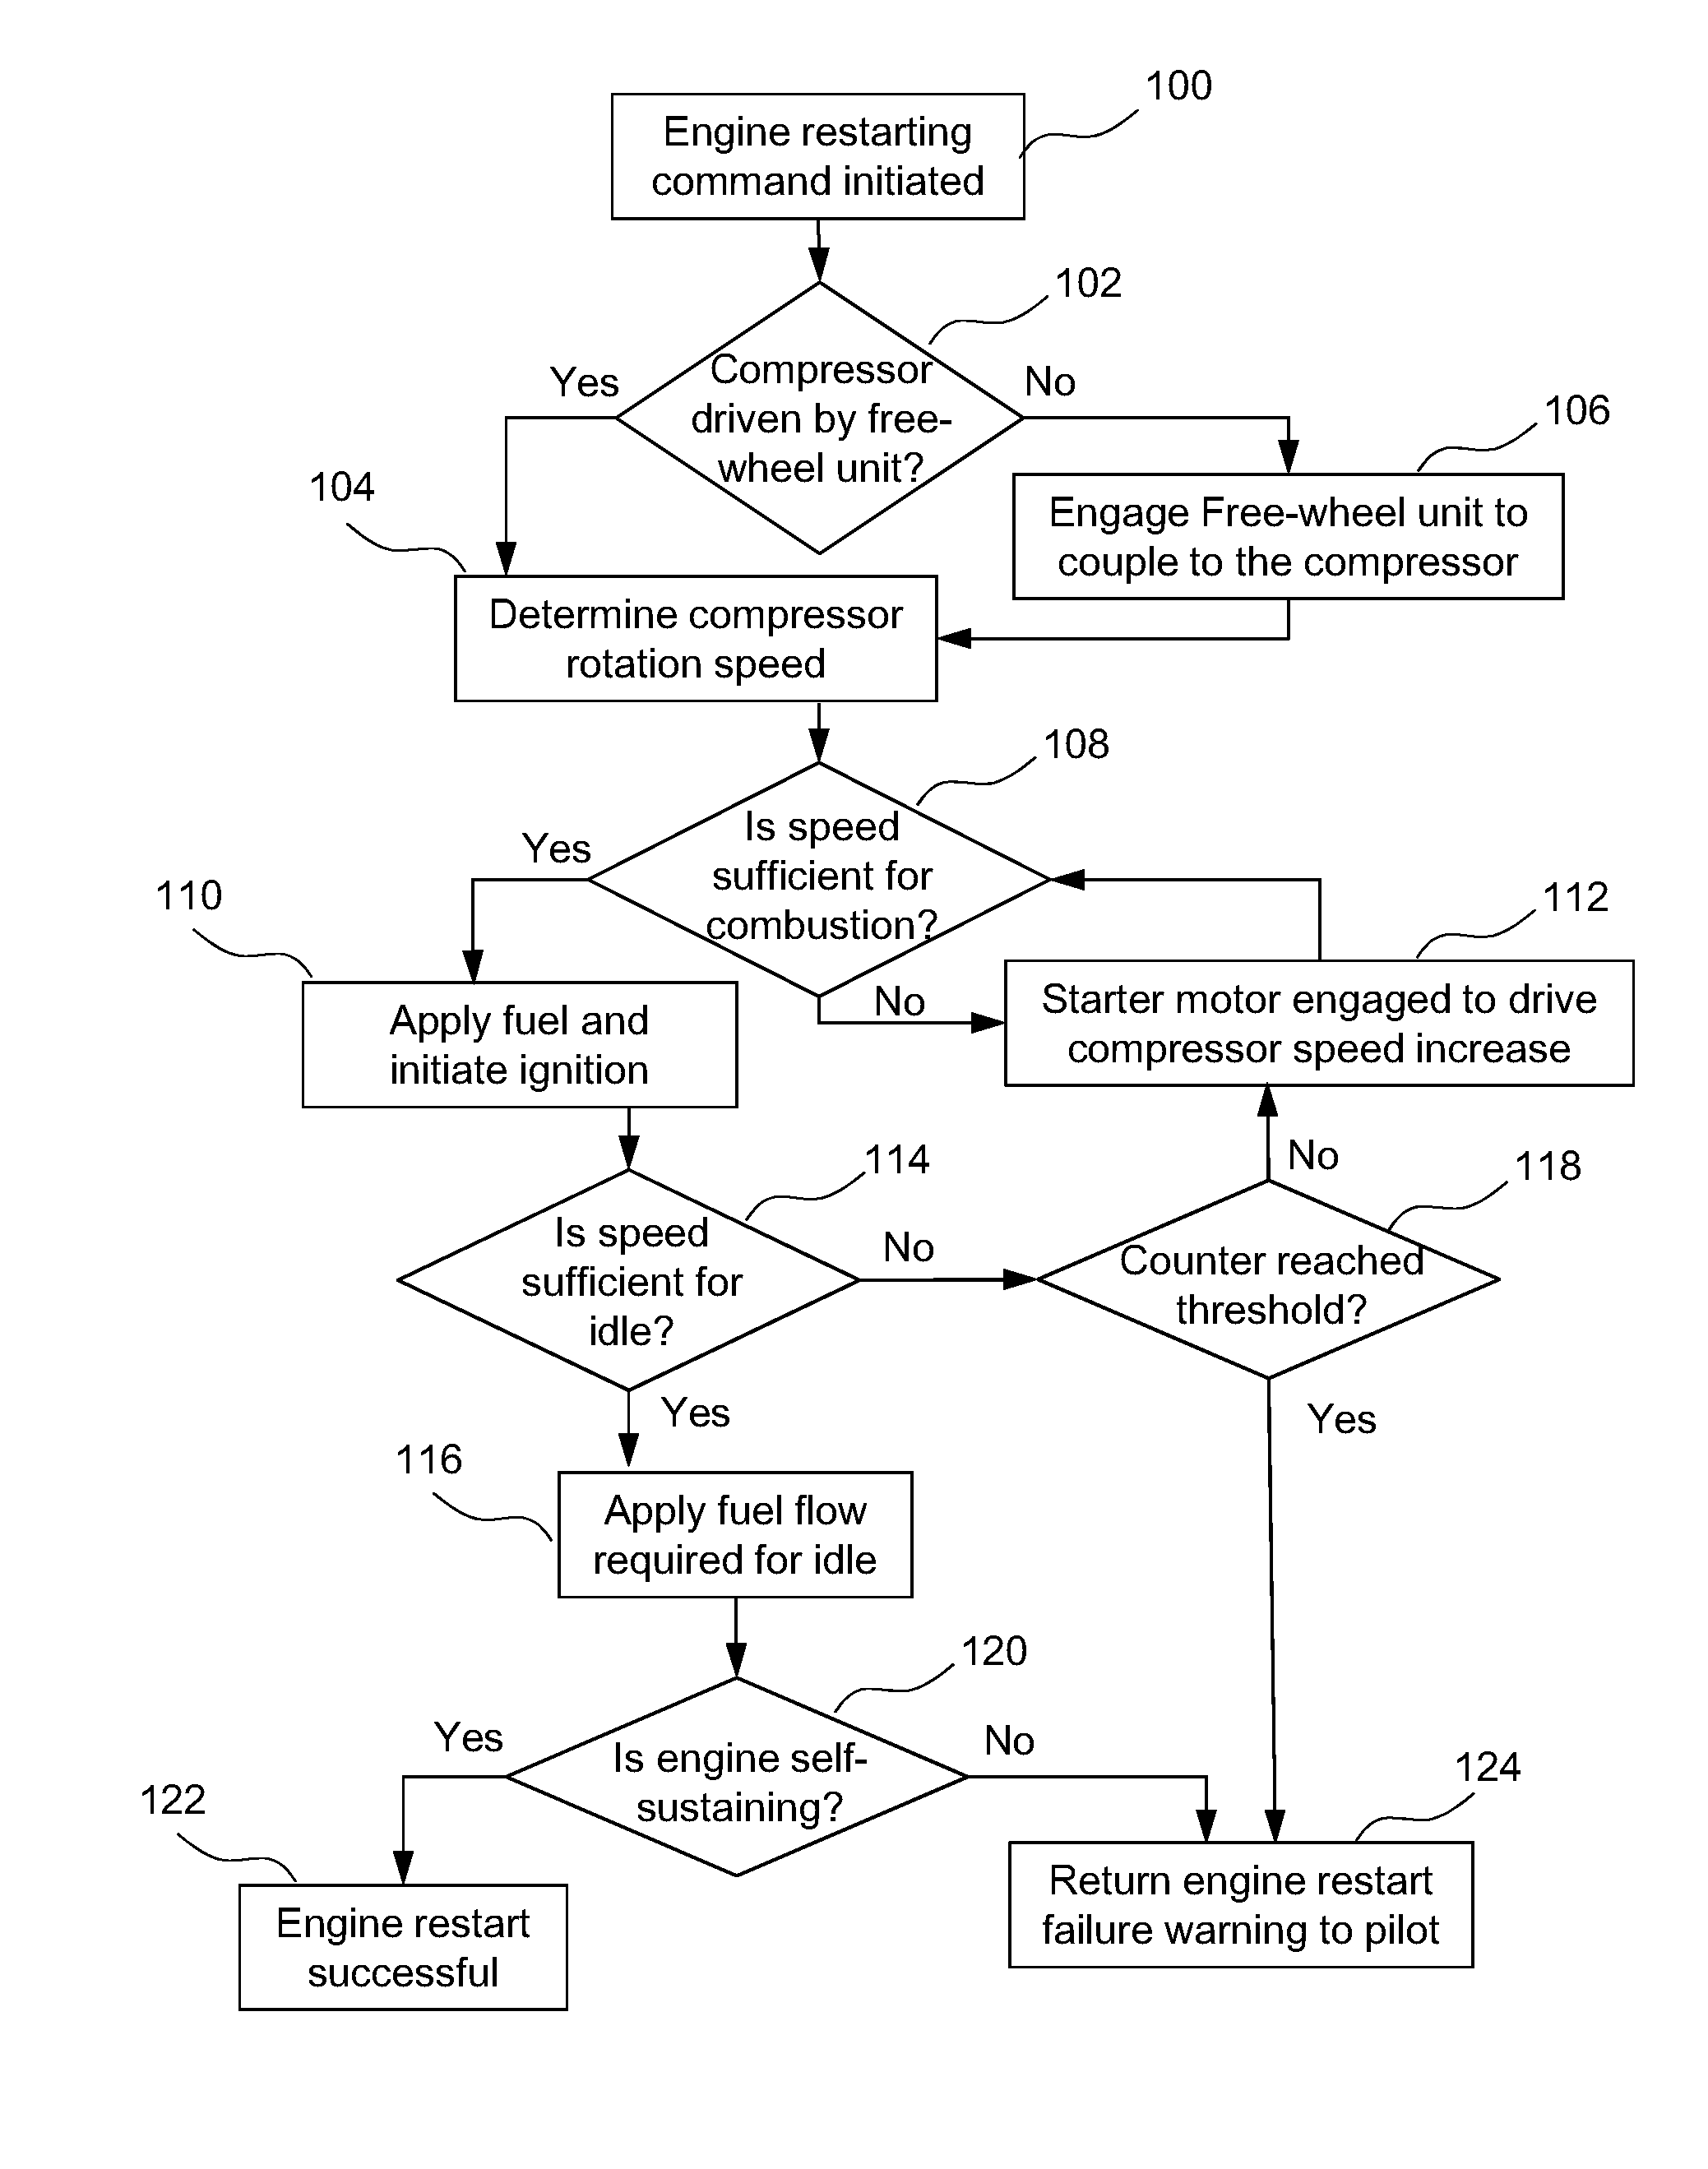 In-flight mechanically assisted turbine engine starting system